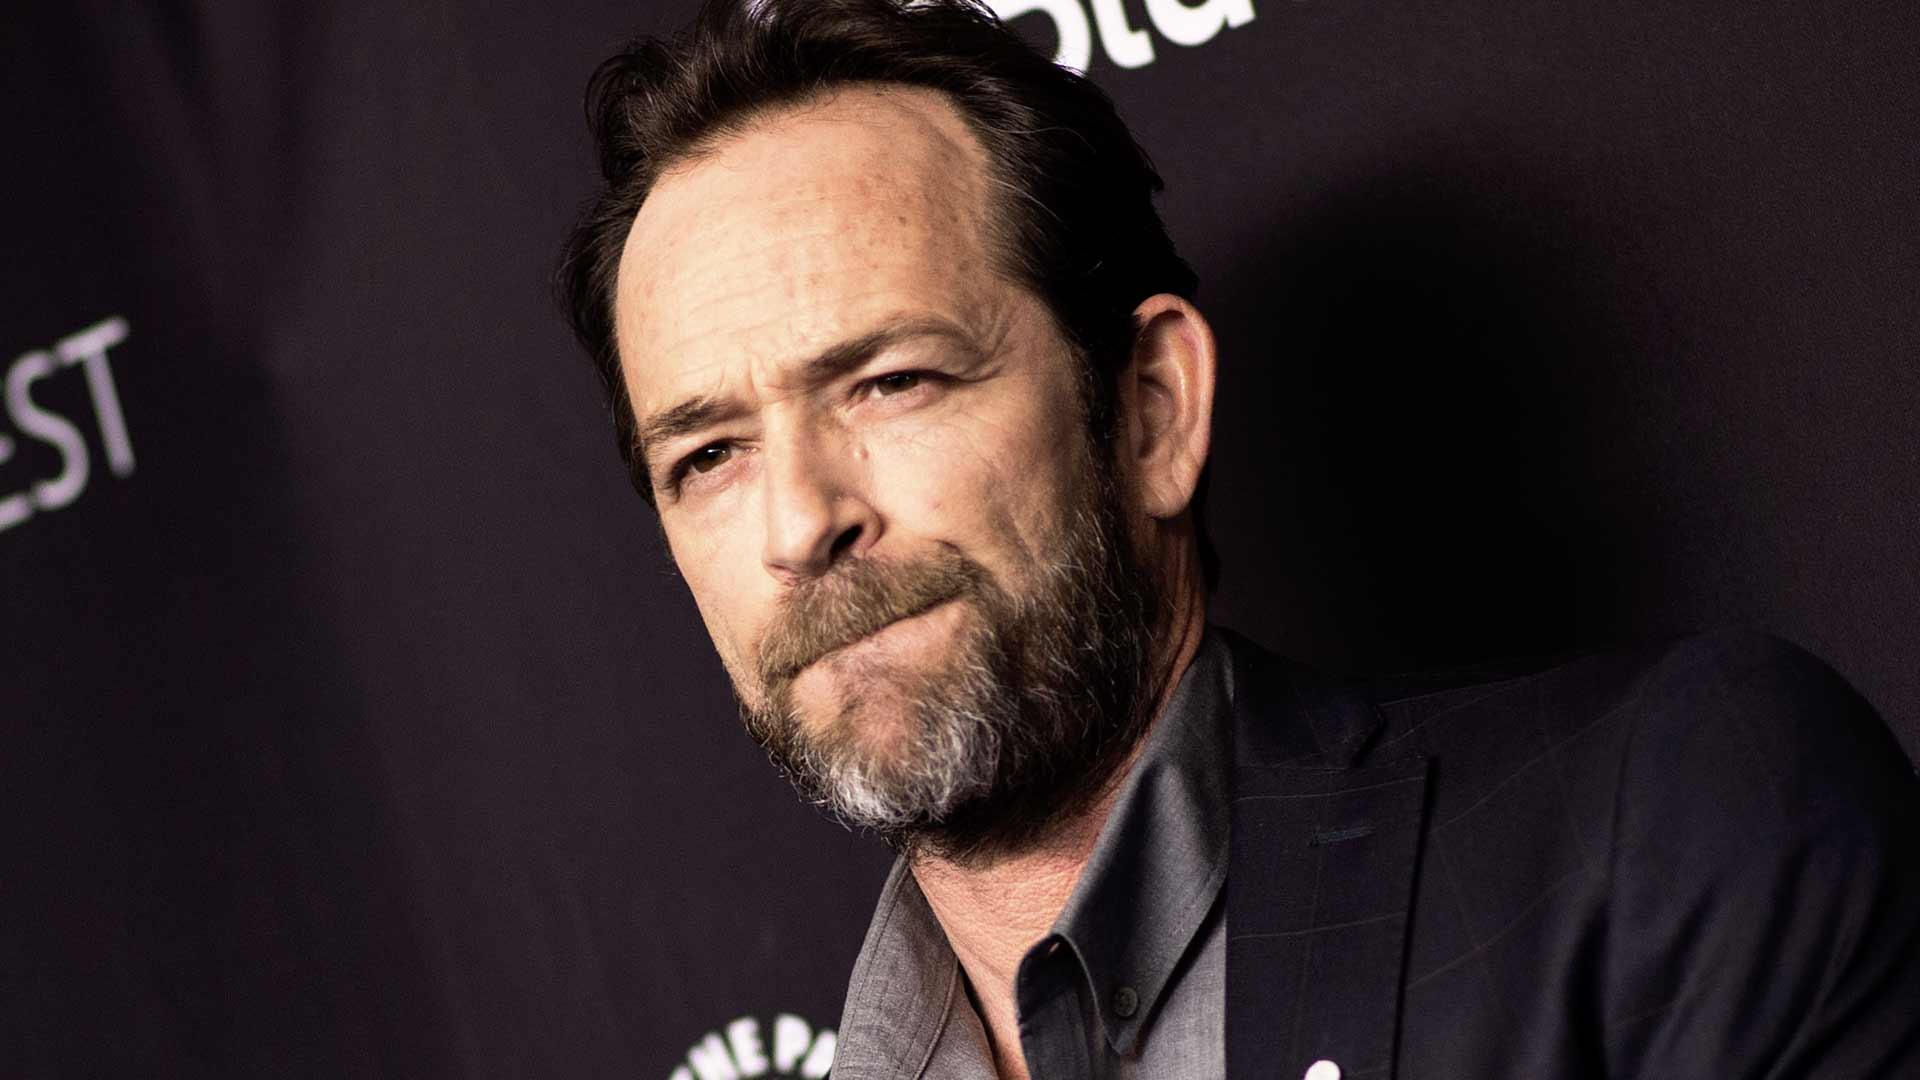 Luke Perry’s Death Certificate Reveals Ischemic Stroke Led to His Death